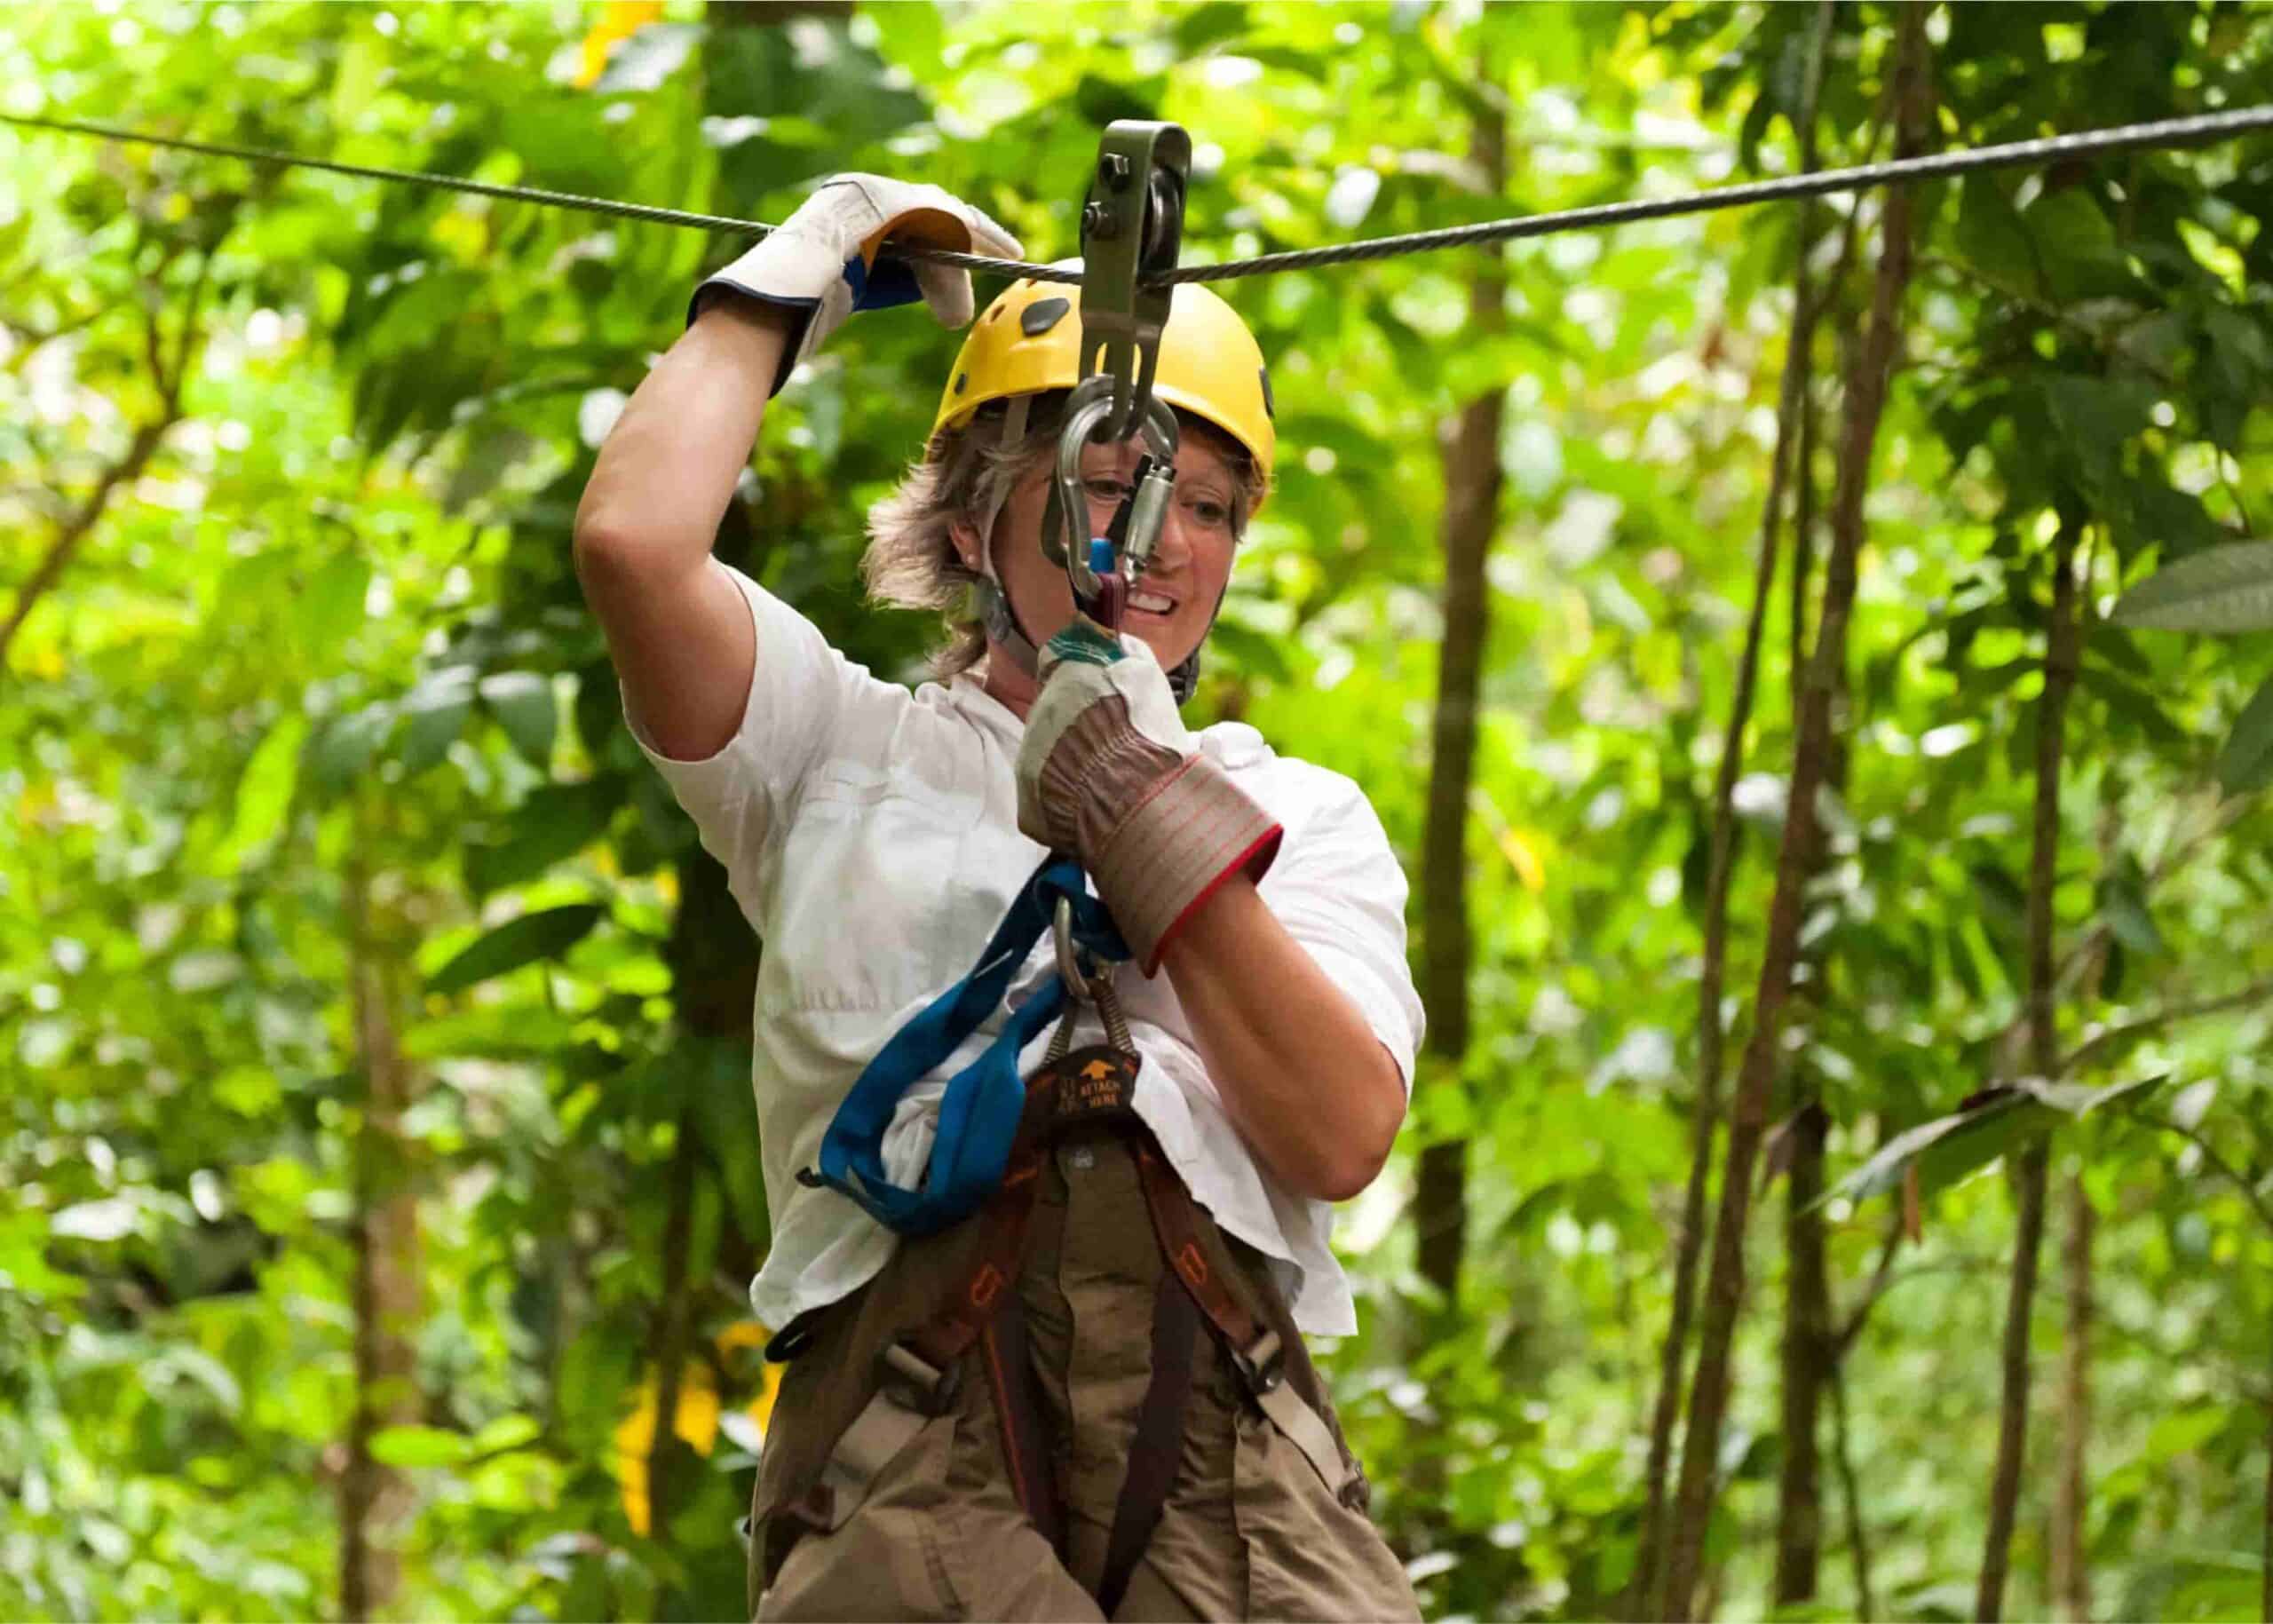 a woman on a zipline going through a forest in Costa Rica